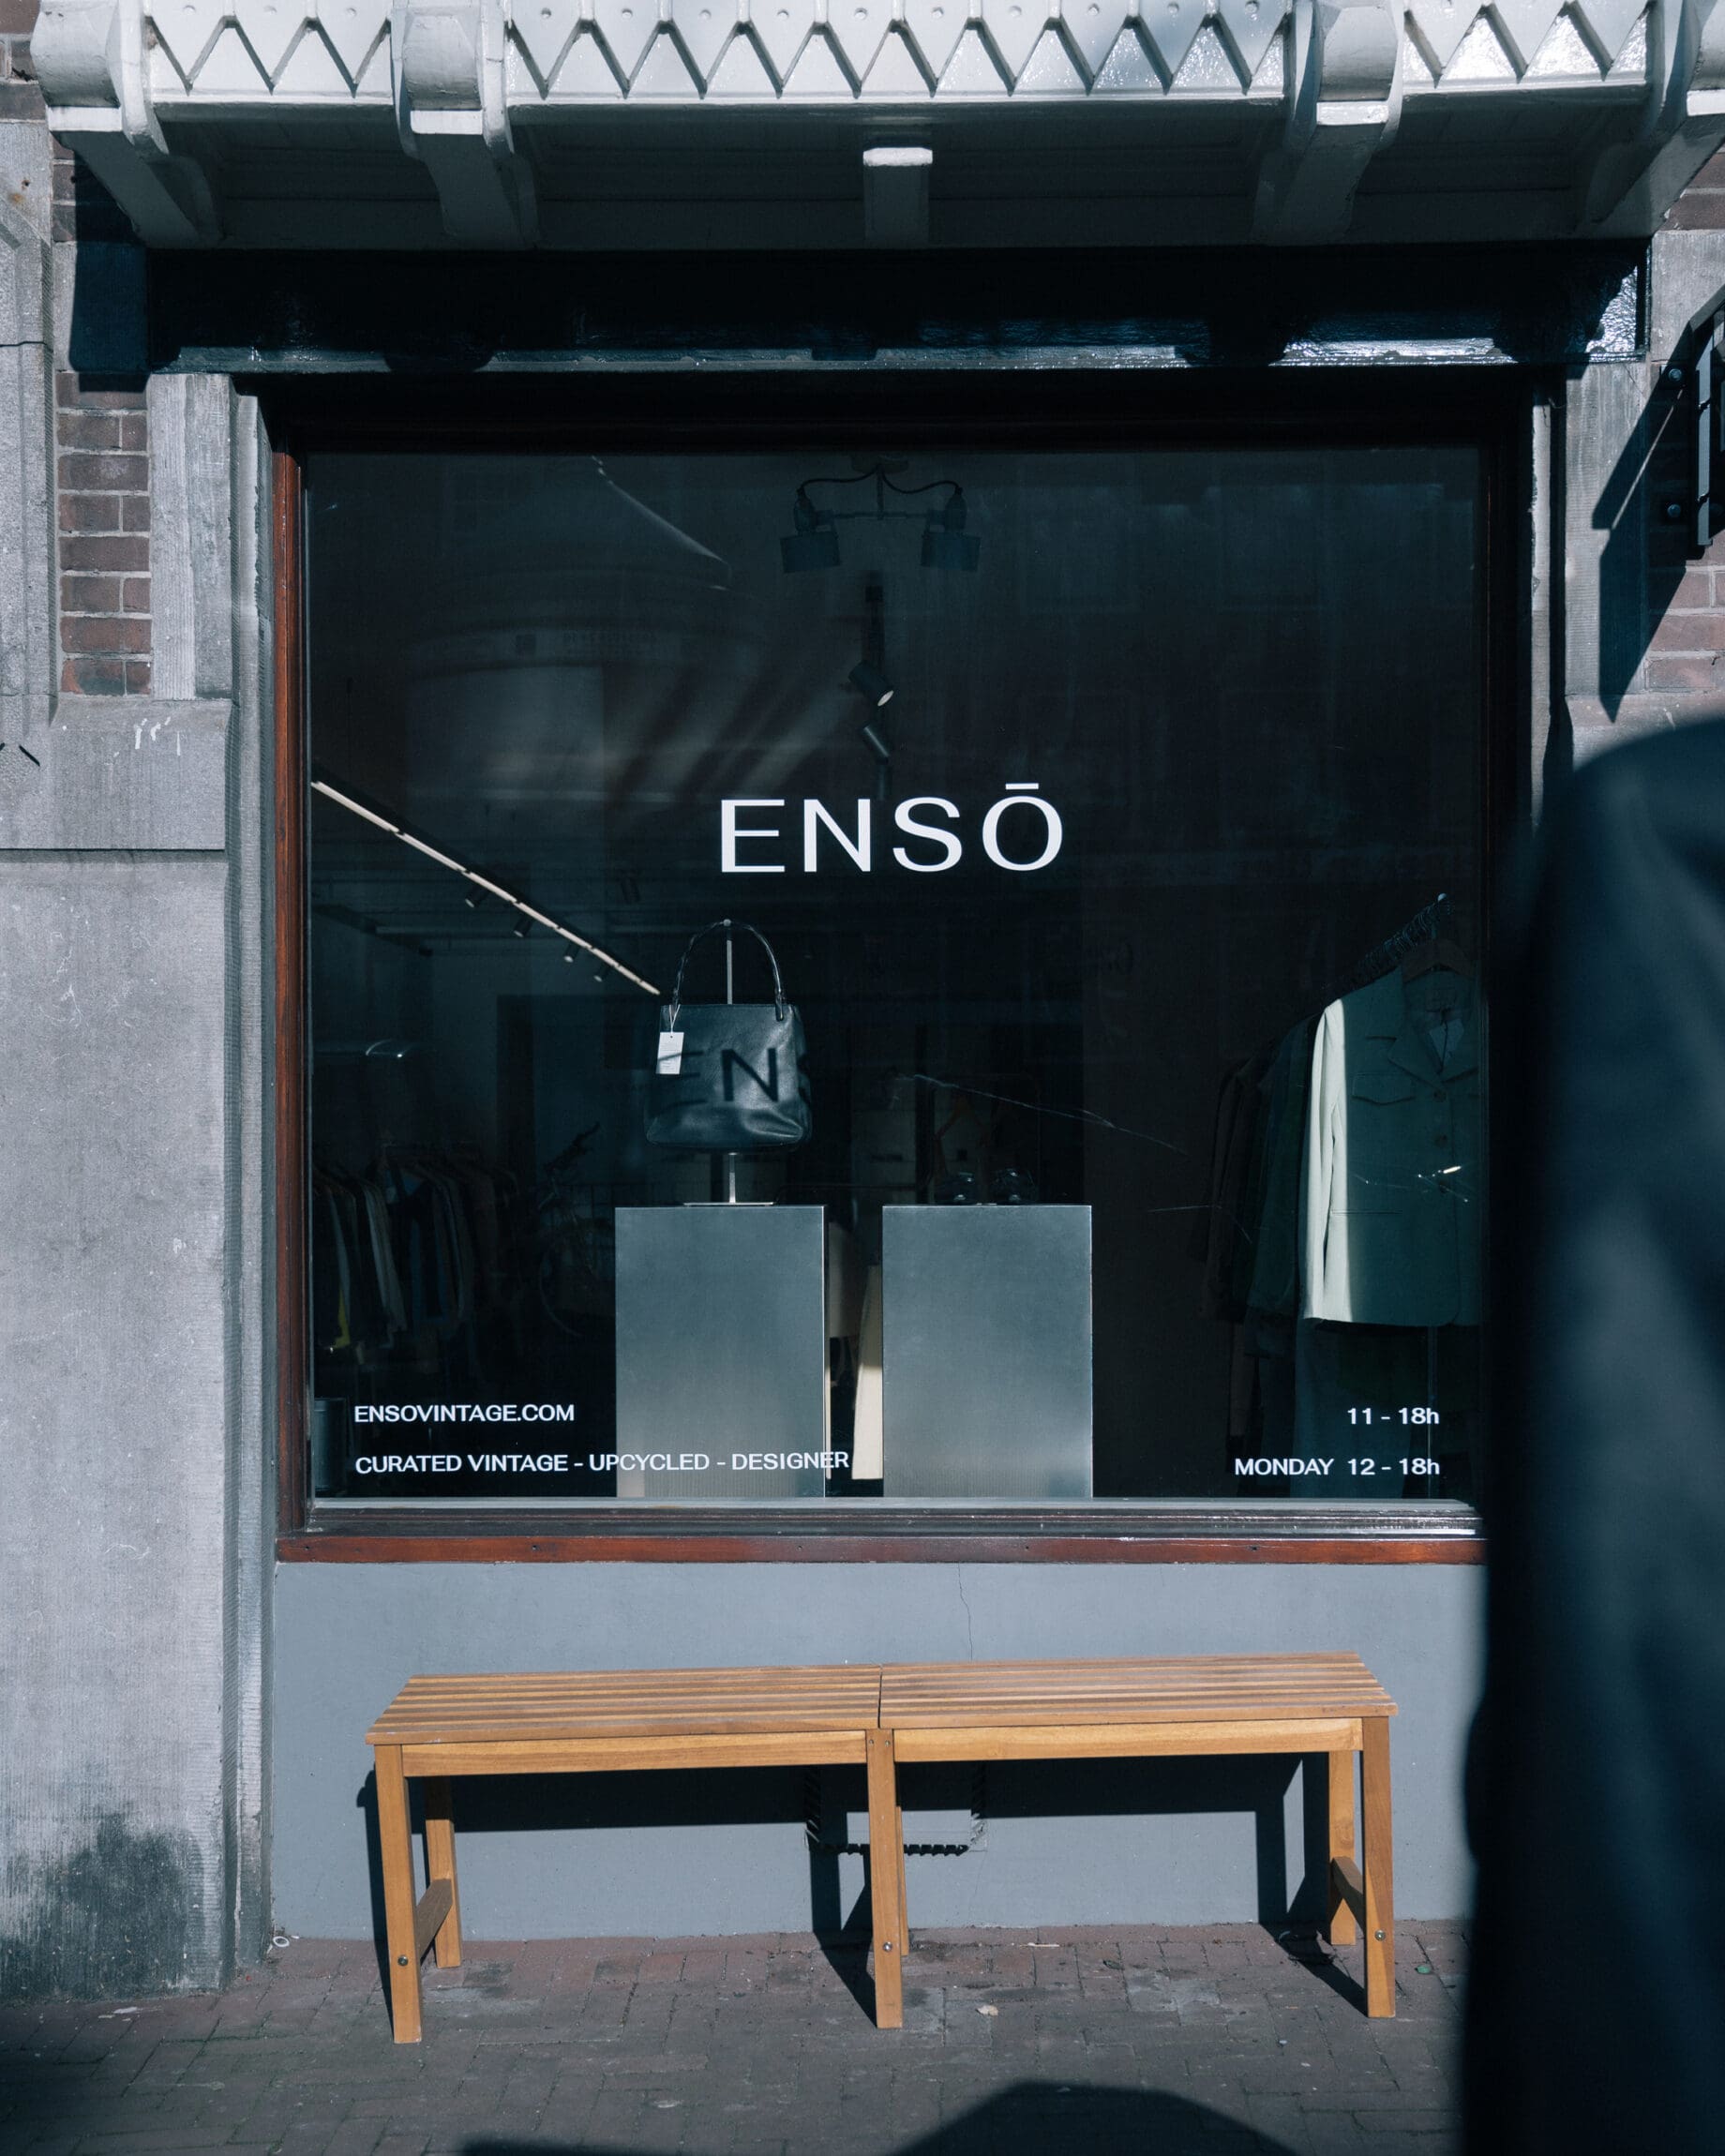 The best vintage shops in Amsterdam | the exterior of Enso